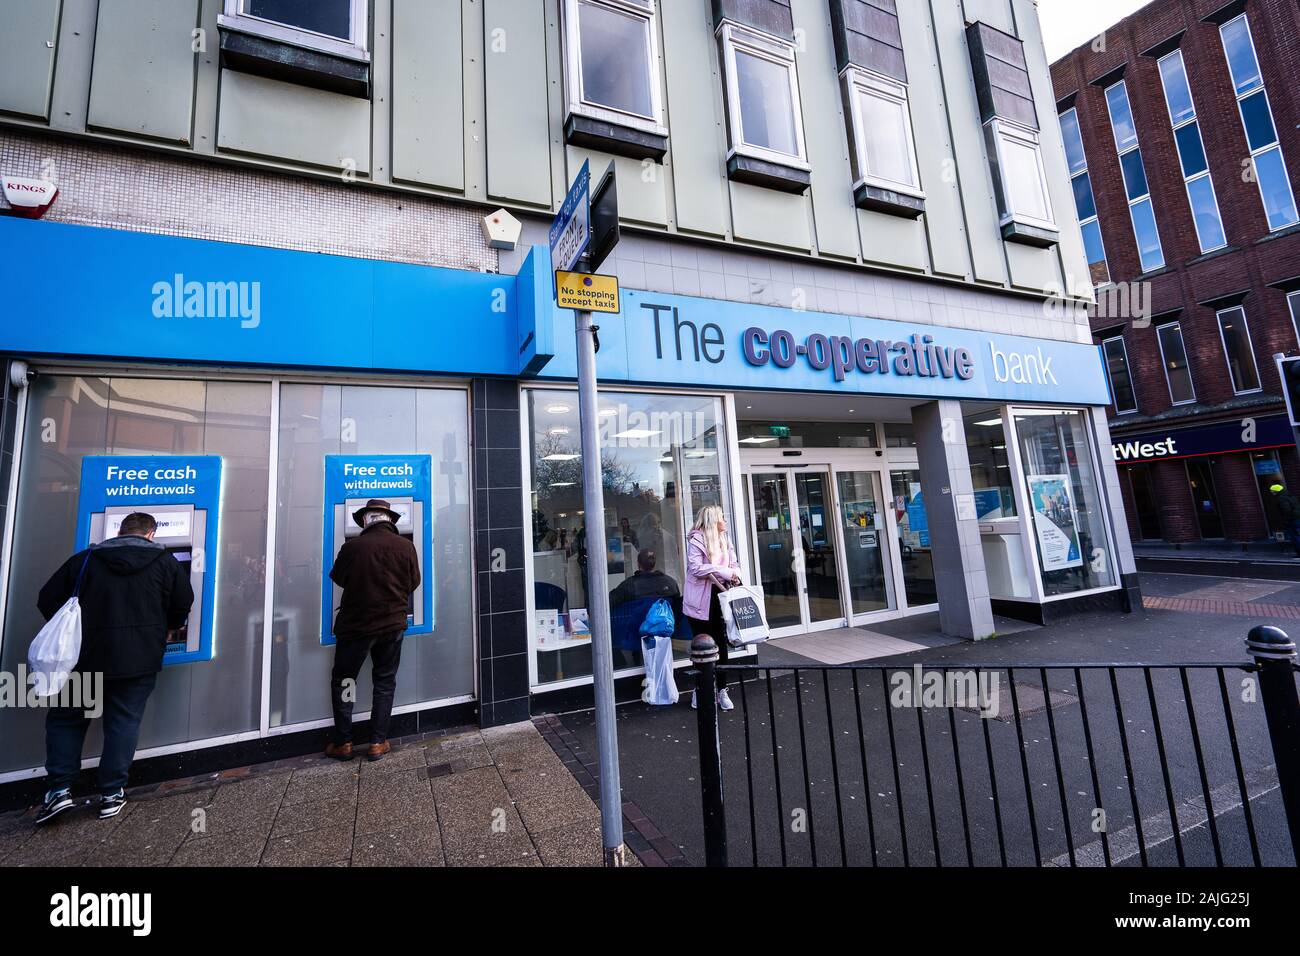 People, customers using the ATM, Cash machines at the Co-operative bank on the high street in the city centre, withdrawing money Stock Photo